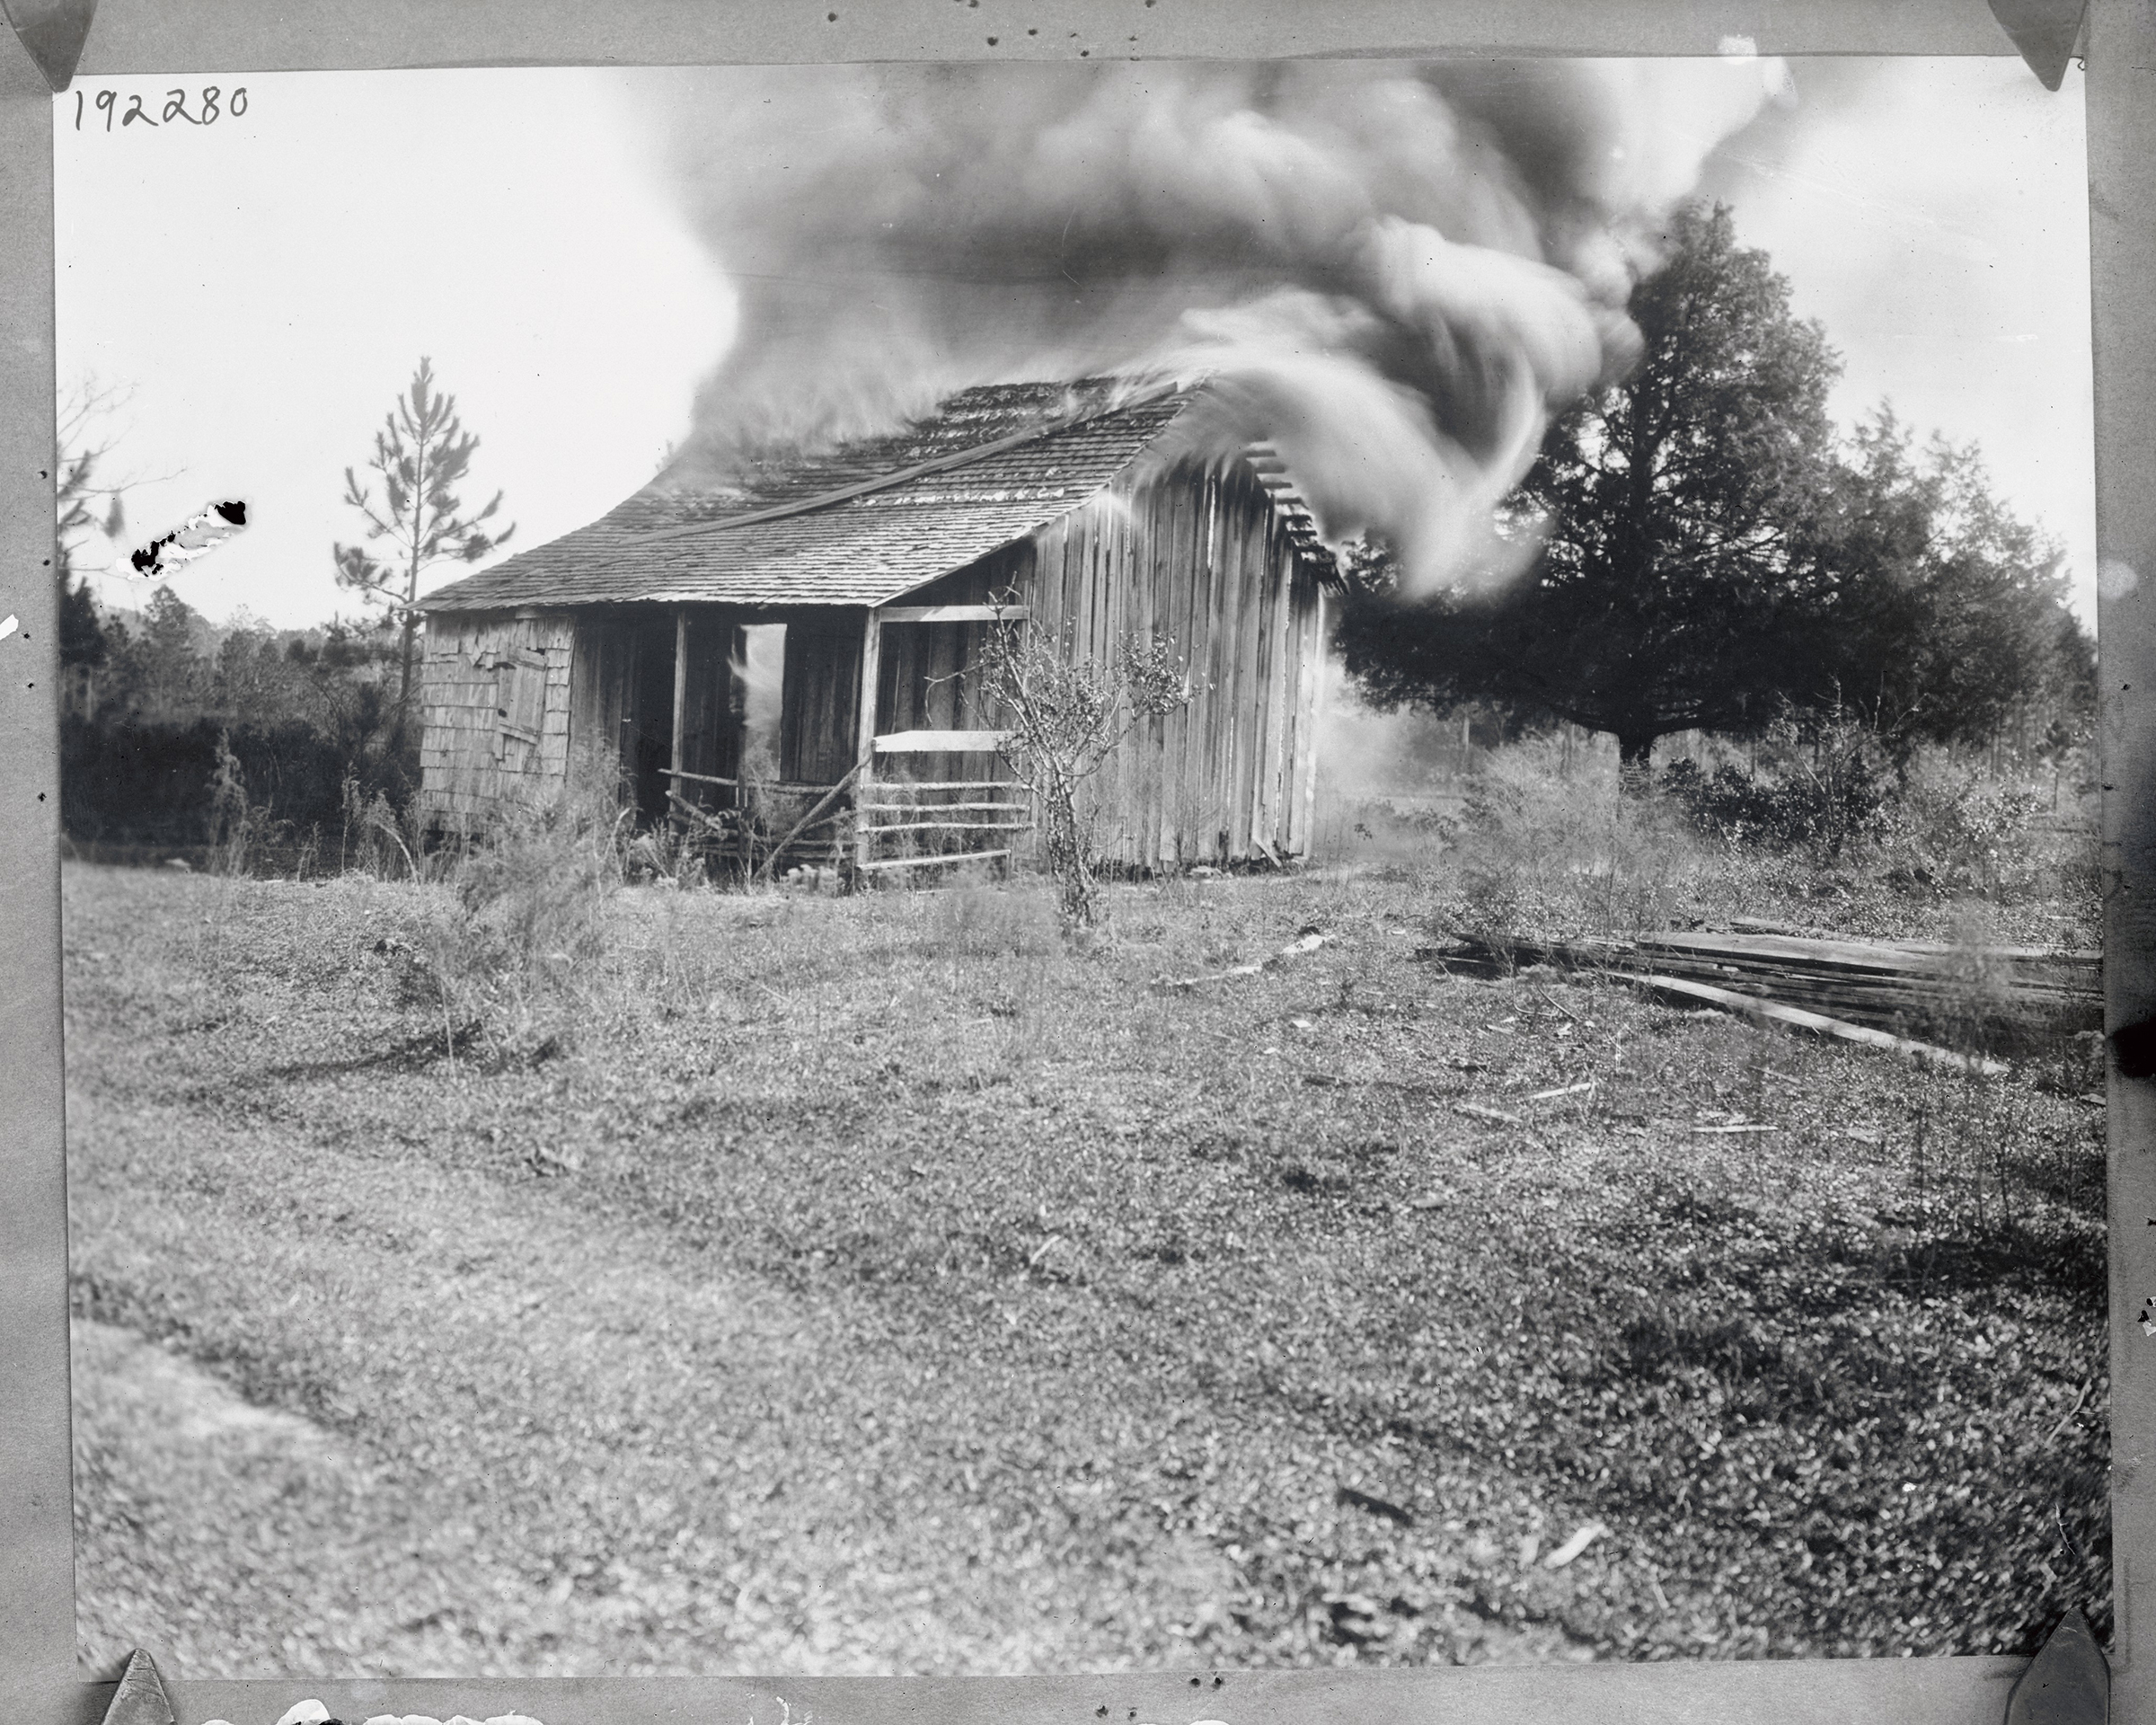 A home burns on Jan. 9, 1923, during a white mob’s attacks on the Black community of Rosewood, Fla. (Bettmann Archive/Getty Images)